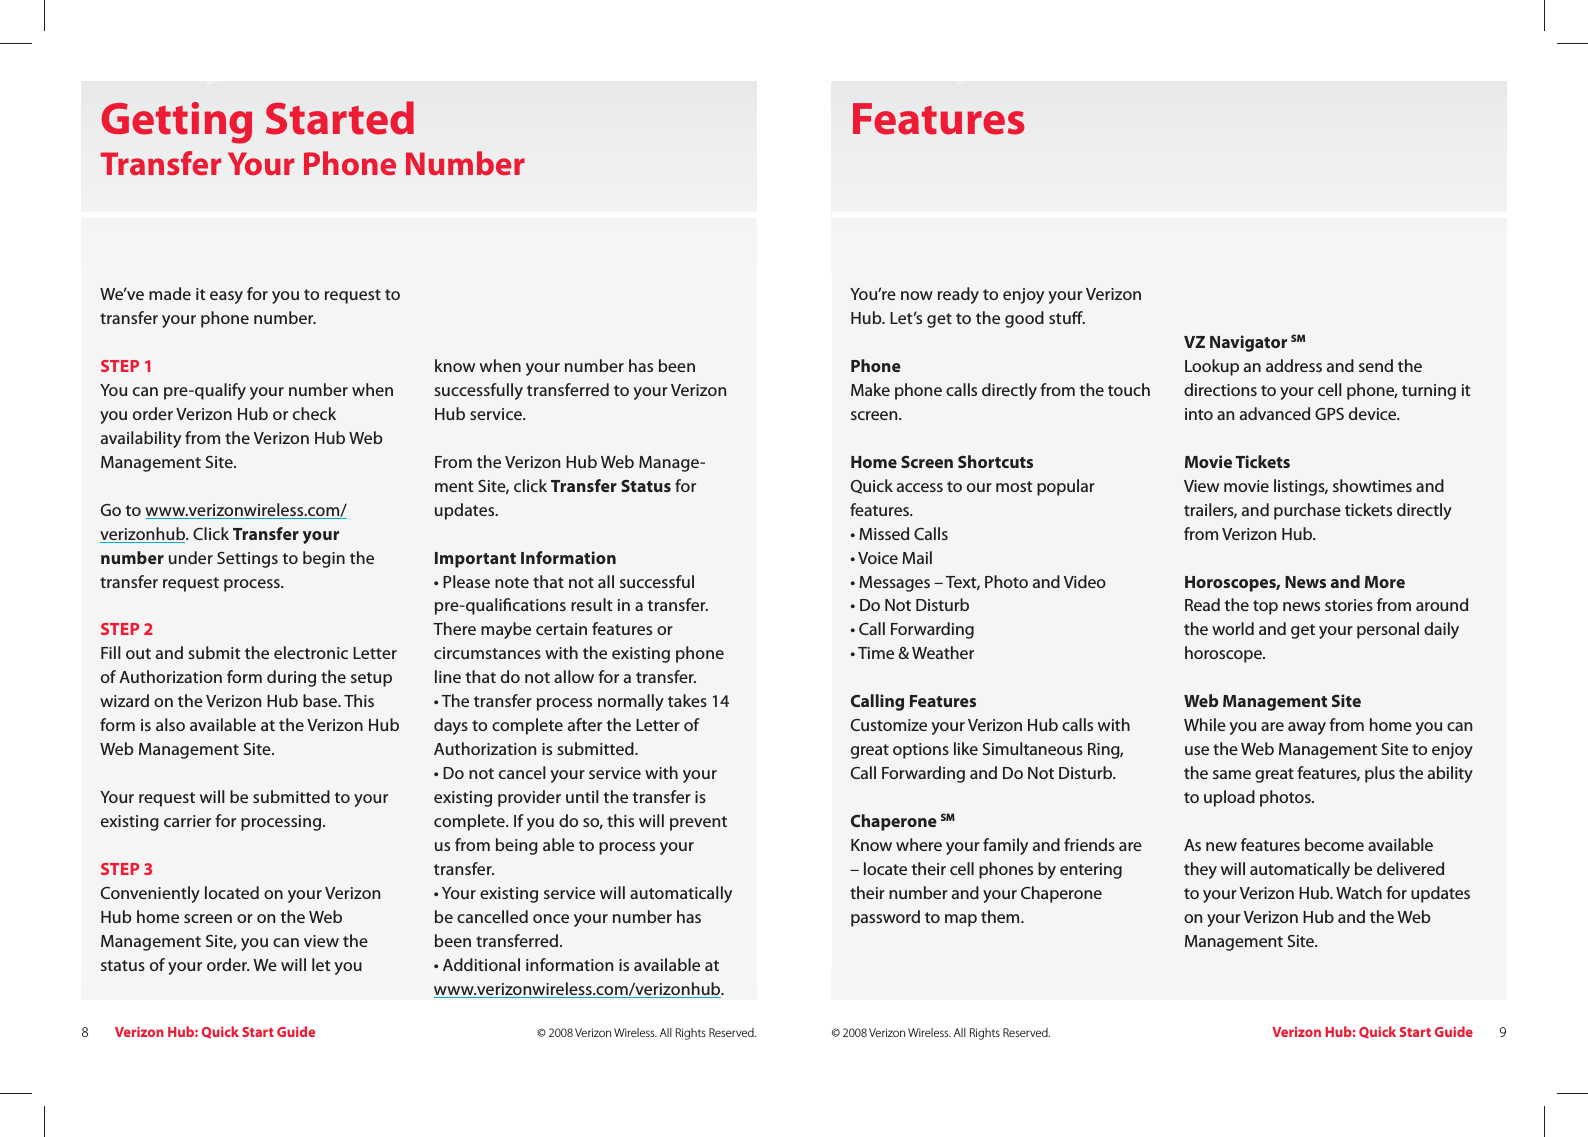 Verizon Hub: Quick Start Guide8© 2008 Verizon Wireless. All Rights Reserved. Verizon Hub: Quick Start Guide 9© 2008 Verizon Wireless. All Rights Reserved.Getting StartedTransfer Your Phone NumberWe’ve made it easy for you to request to transfer your phone number.  STEP 1You can pre-qualify your number when you order Verizon Hub or check availability from the Verizon Hub Web Management Site. Go to www.verizonwireless.com/verizonhub. Click Transfer your number under Settings to begin the transfer request process.STEP 2 Fill out and submit the electronic Letter of Authorization form during the setup wizard on the Verizon Hub base. This form is also available at the Verizon Hub Web Management Site.  Your request will be submitted to your existing carrier for processing.  STEP 3 Conveniently located on your Verizon Hub home screen or on the Web Management Site, you can view the status of your order. We will let youknow when your number has beensuccessfully transferred to your Verizon Hub service.From the Verizon Hub Web Manage-ment Site, click Transfer Status for updates. Important Information  • Please note that not all successful pre-quali cations result in a transfer. There maybe certain features or circumstances with the existing phone line that do not allow for a transfer.• The transfer process normally takes 14 days to complete after the Letter of Authorization is submitted.• Do not cancel your service with your existing provider until the transfer is complete. If you do so, this will prevent us from being able to process your transfer.• Your existing service will automatically be cancelled once your number has been transferred.• Additional information is available at www.verizonwireless.com/verizonhub.  FeaturesYou’re now ready to enjoy your Verizon Hub. Let’s get to the good stu . Phone Make phone calls directly from the touch screen.Home Screen ShortcutsQuick access to our most popular features.• Missed Calls• Voice Mail• Messages – Text, Photo and Video • Do Not Disturb• Call Forwarding• Time &amp; WeatherCalling FeaturesCustomize your Verizon Hub calls with great options like Simultaneous Ring, Call Forwarding and Do Not Disturb.Chaperone SMKnow where your family and friends are – locate their cell phones by entering their number and your Chaperone password to map them.VZ Navigator SMLookup an address and send the directions to your cell phone, turning it into an advanced GPS device. Movie TicketsView movie listings, showtimes and trailers, and purchase tickets directly from Verizon Hub.Horoscopes, News and MoreRead the top news stories from around the world and get your personal daily horoscope. Web Management SiteWhile you are away from home you can use the Web Management Site to enjoy the same great features, plus the ability to upload photos.As new features become availablethey will automatically be deliveredto your Verizon Hub. Watch for updates on your Verizon Hub and the Web Management Site.